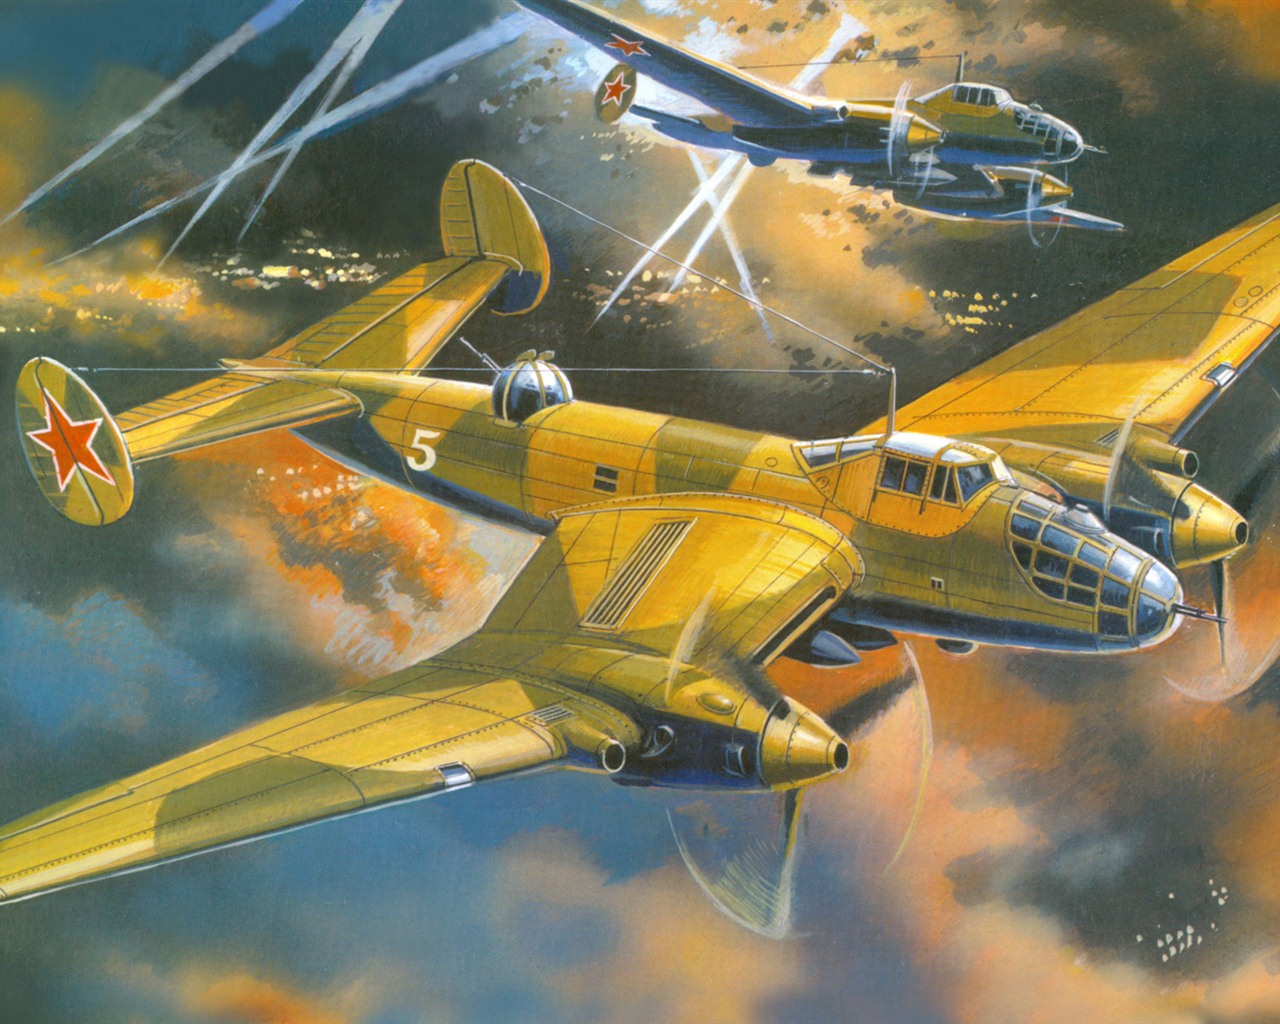 Military aircraft flight exquisite painting wallpapers #18 - 1280x1024